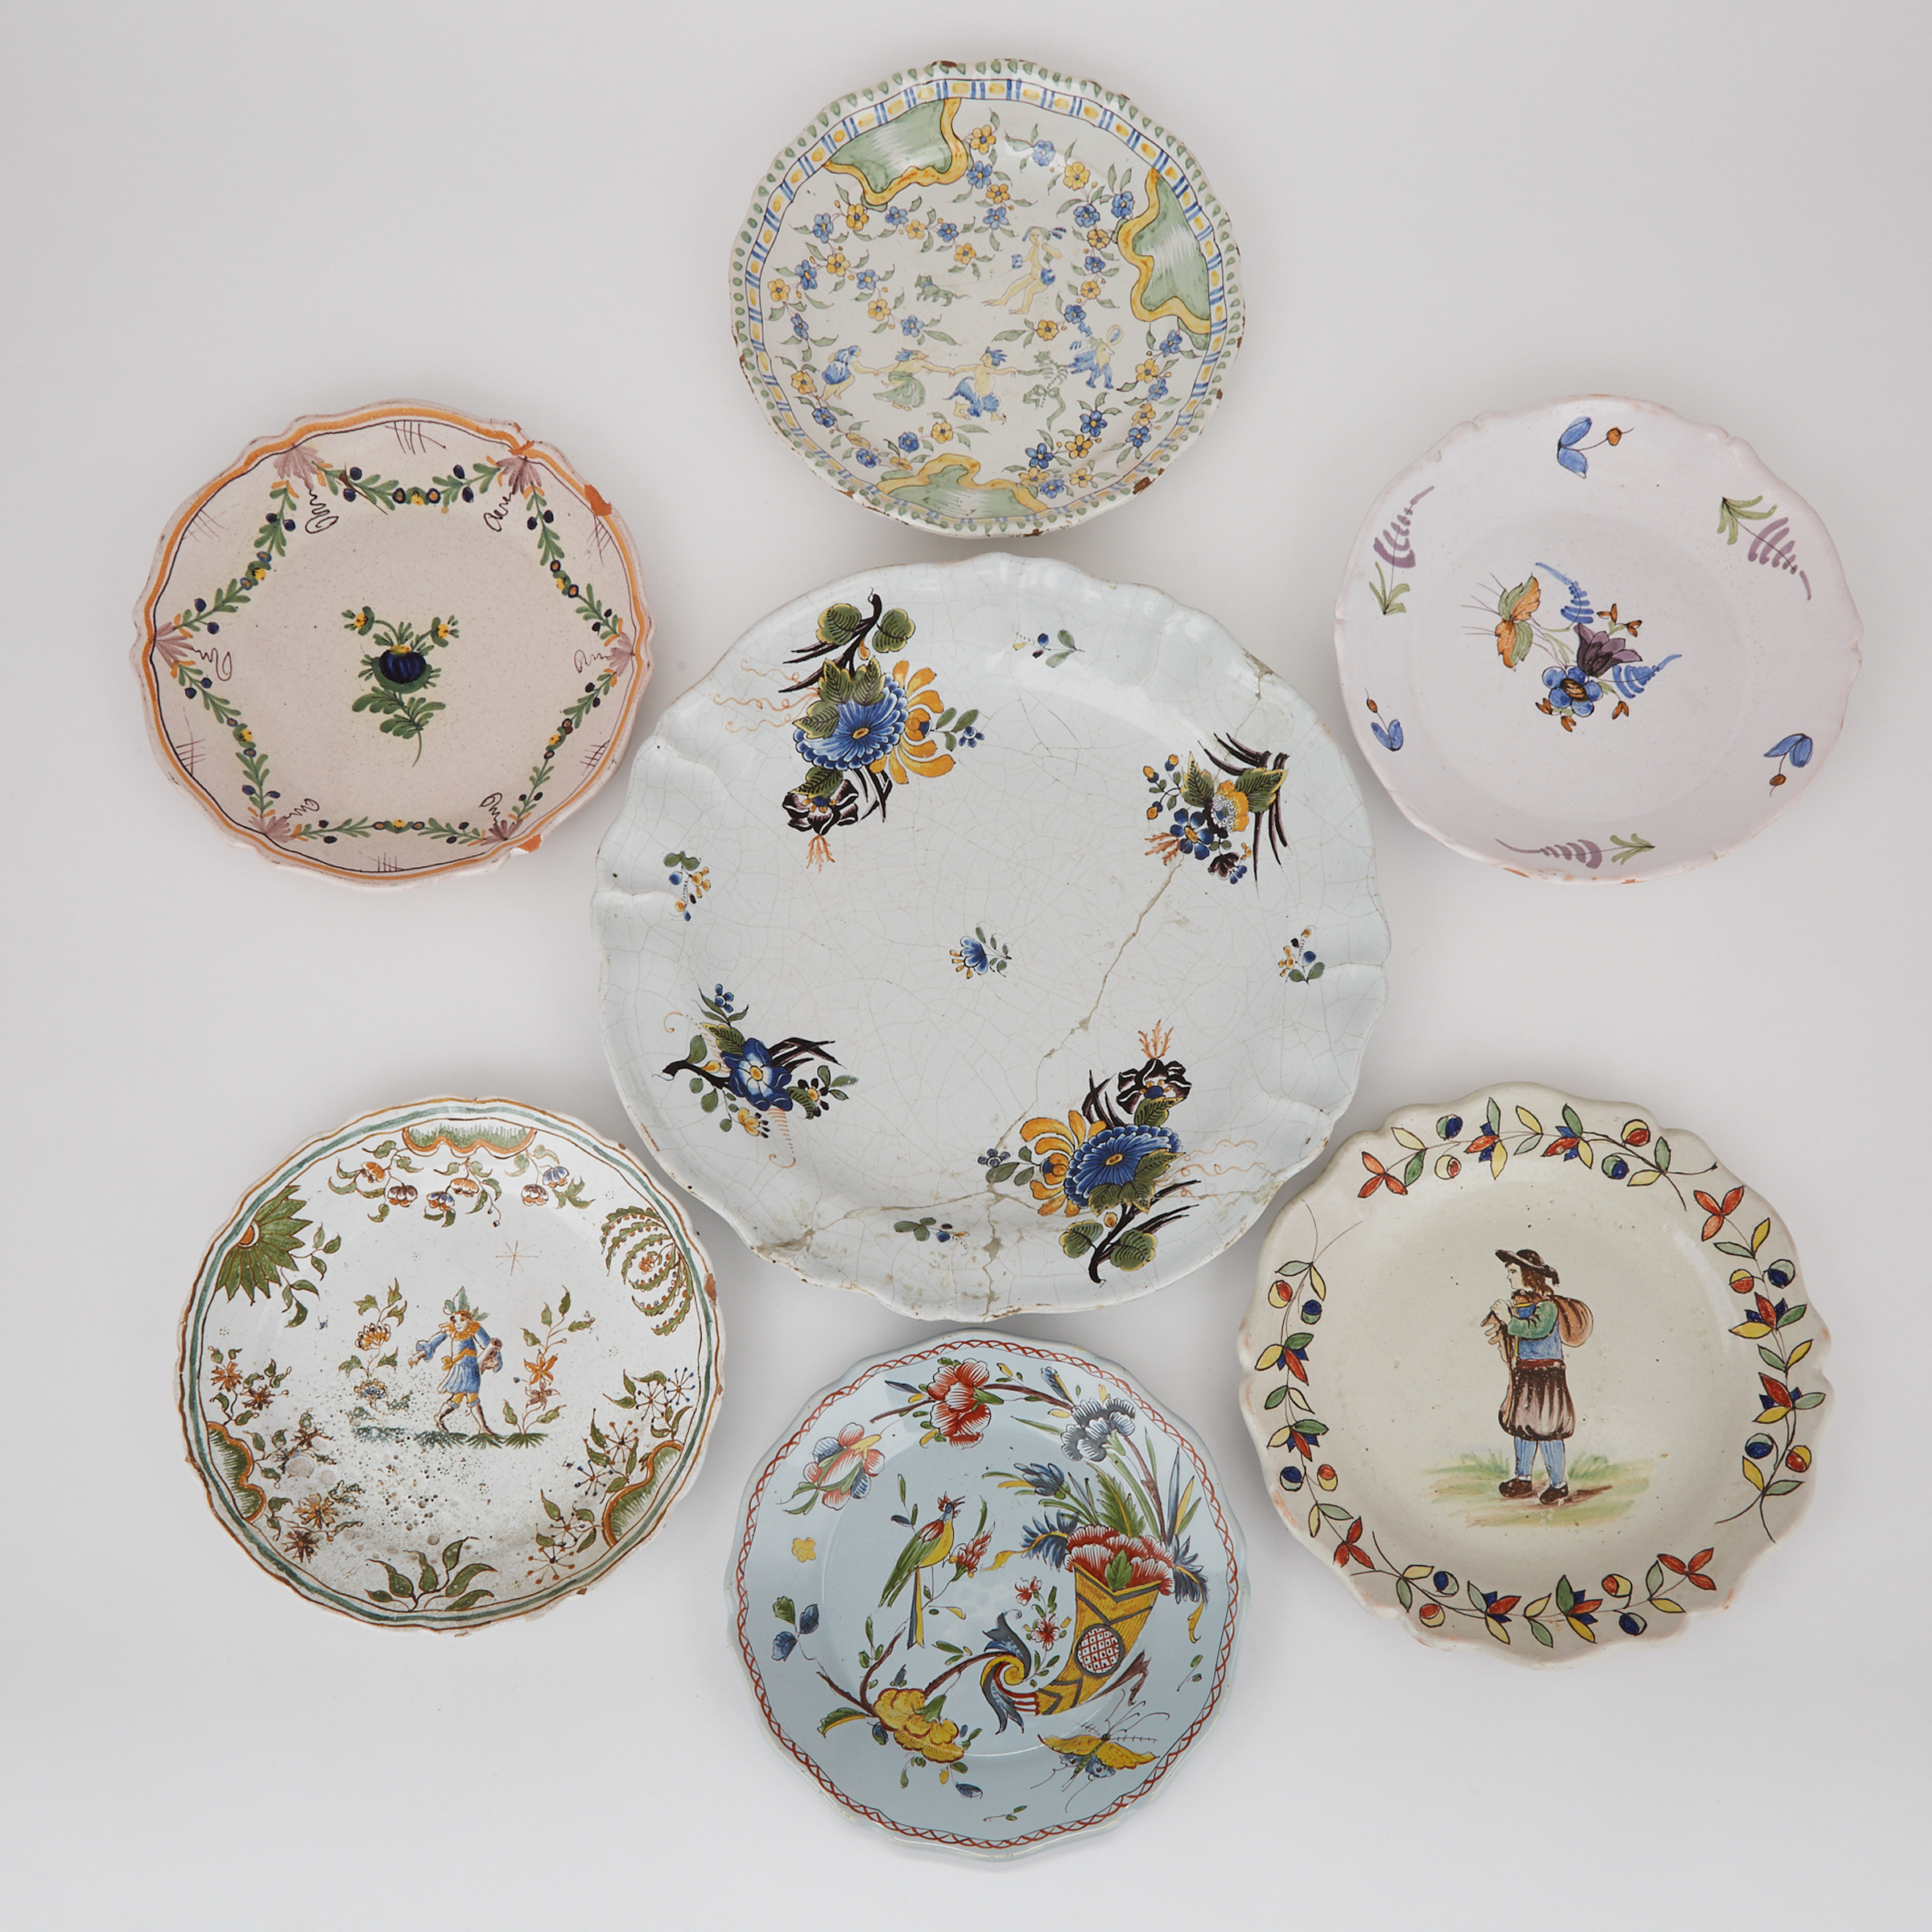 Six French Faience Plates and a German Charger, 18th/19th century